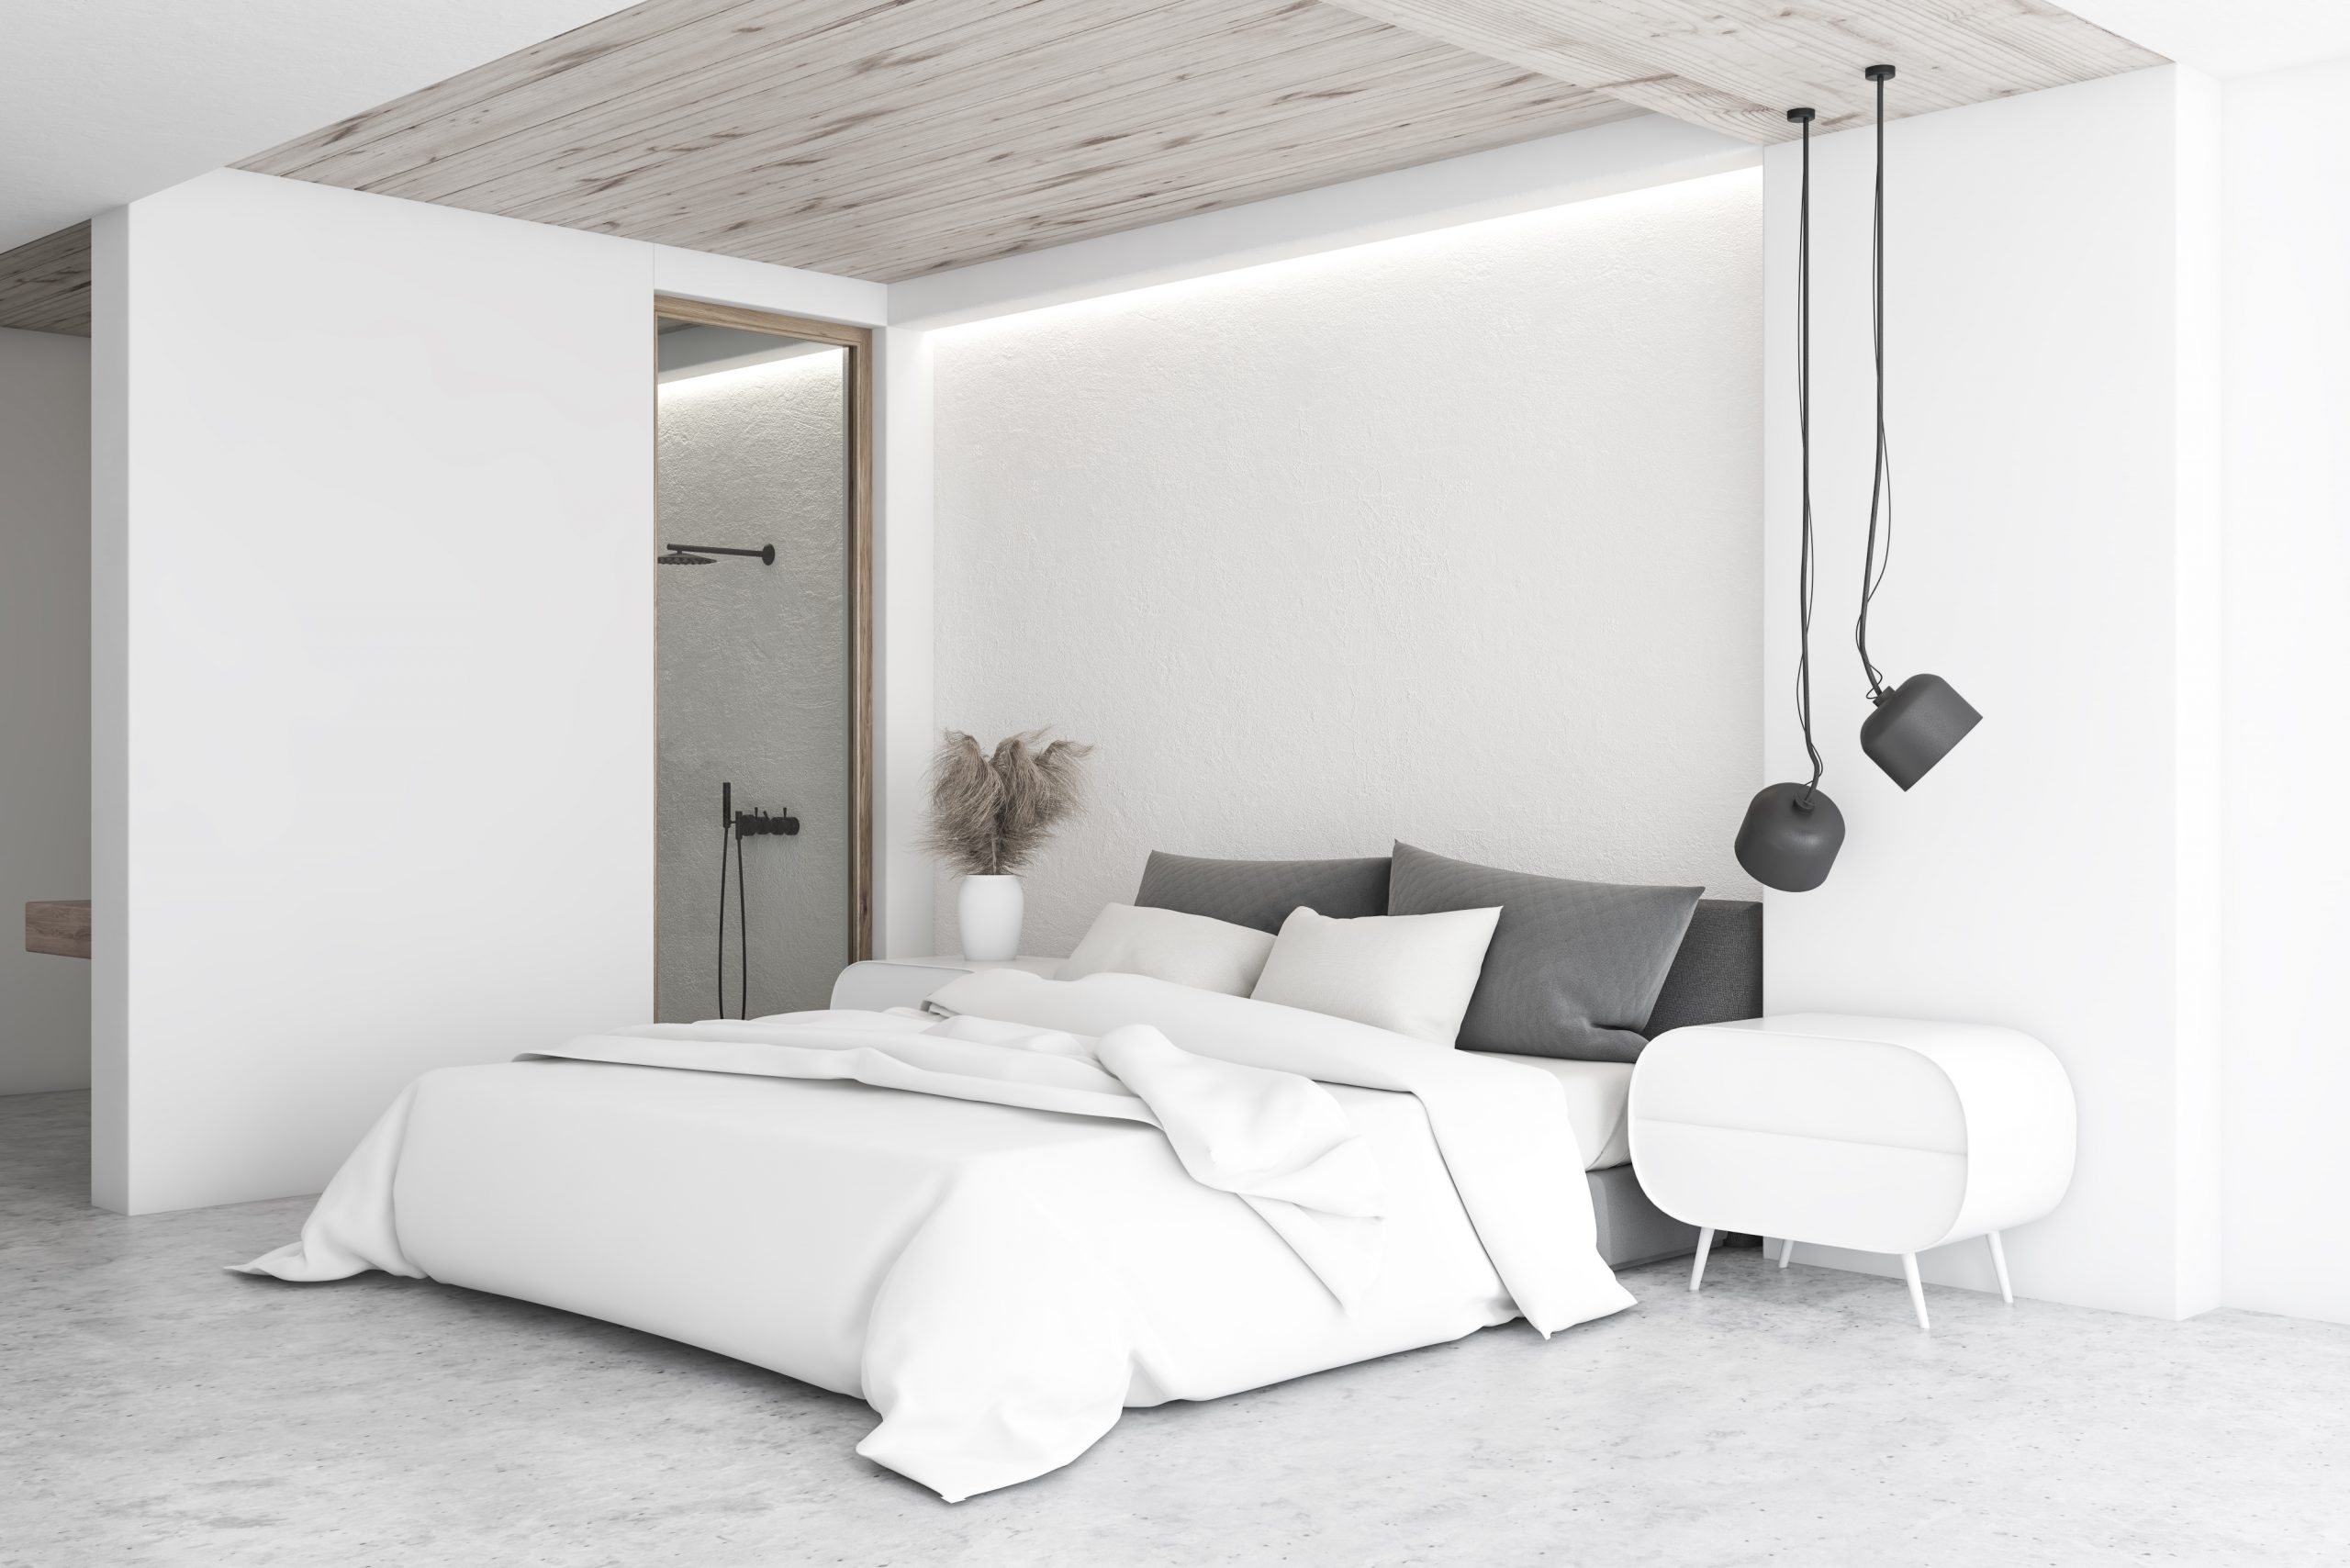 Corner of luxury minimalistic bedroom with white walls, concrete floor, master bed with two bedside tables and stylish ceiling lamps. Bathroom with shower in background. 3d rendering